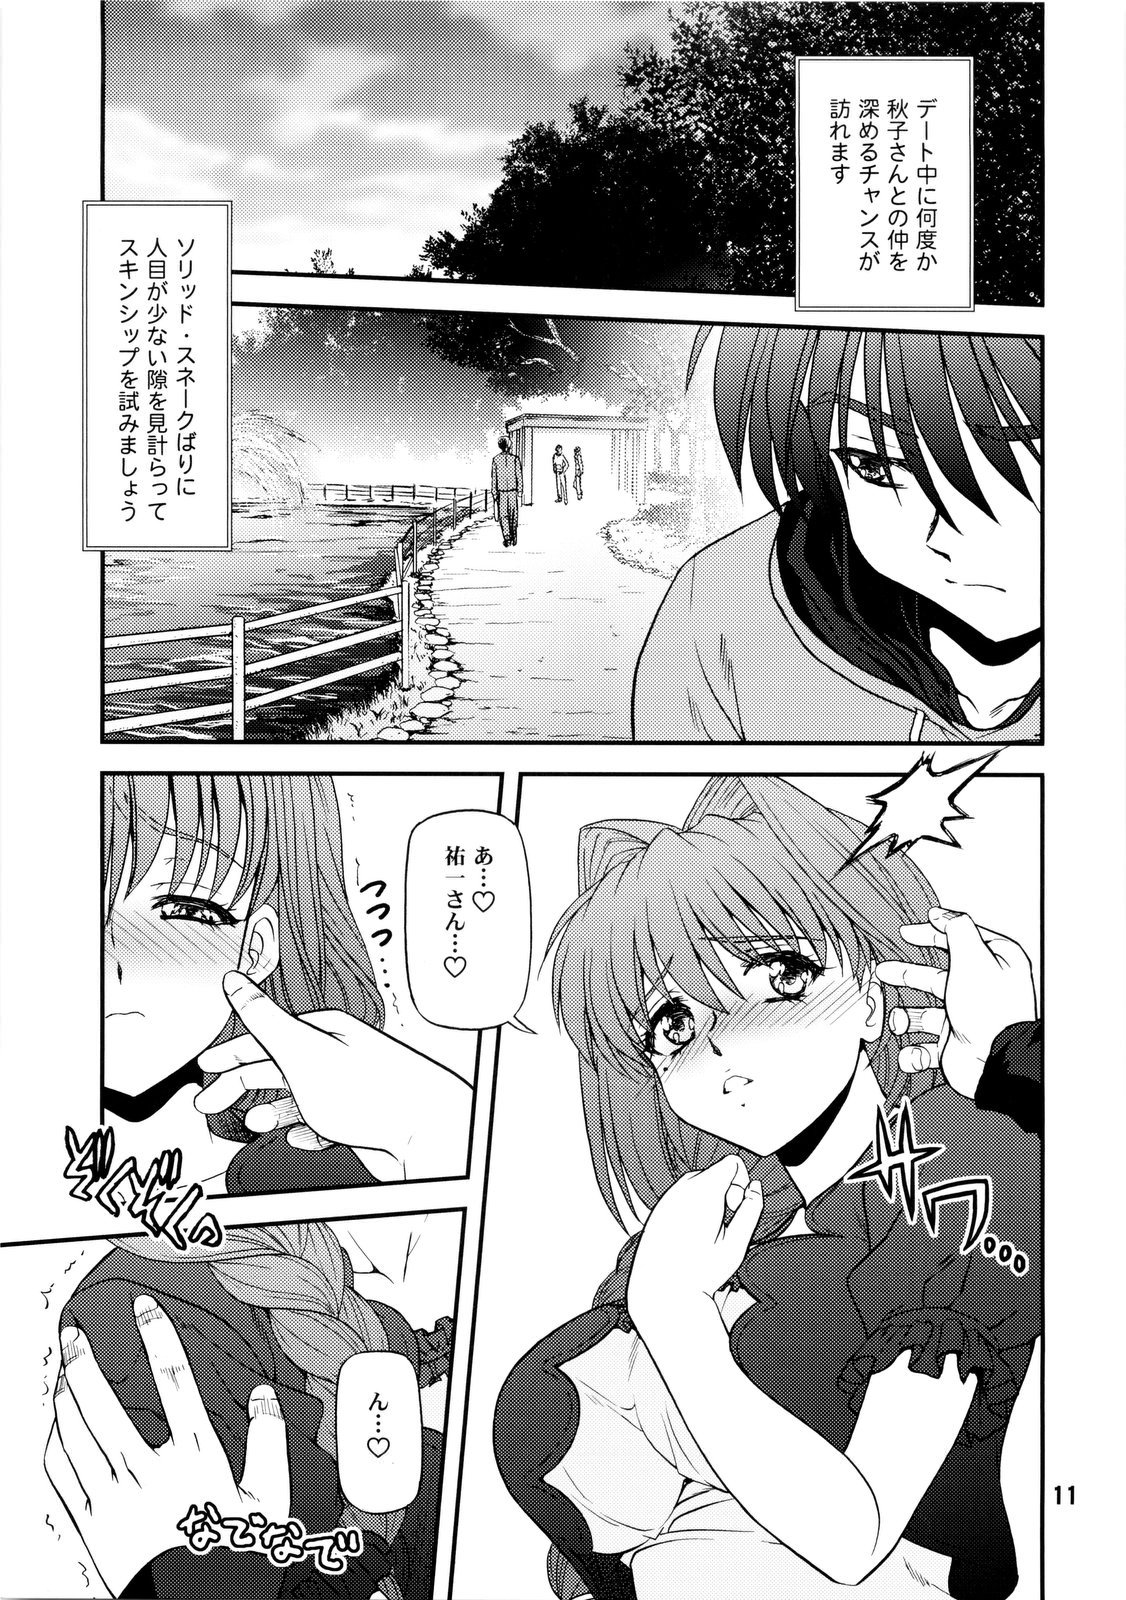 (C77) [BLUE BLOOD] BLUE BLOOD'S Vol.25 (Kanon) page 11 full